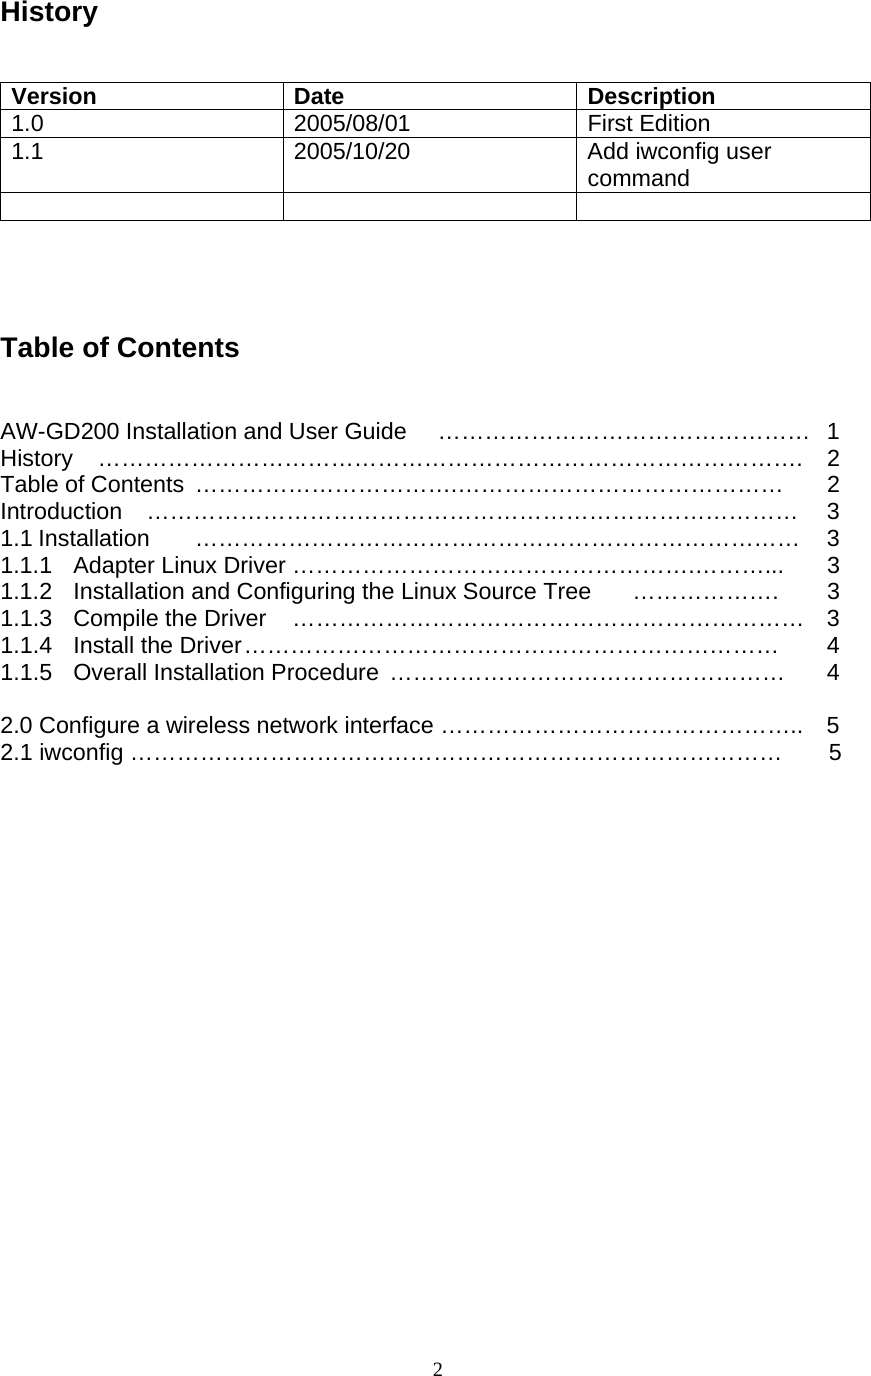  2History    Version Date  Description 1.0 2005/08/01 First Edition 1.1 2005/10/20 Add iwconfig user command          Table of Contents   AW-GD200 Installation and User Guide  …………………………………………  1 History ………………………………………………………………………………. 2 Table of Contents  …………………………….……………………………………  2 Introduction …………………………………………………………………………  3 1.1 Installation  ……………………………………………………………………  3 1.1.1  Adapter Linux Driver …………………………………………….………... 3 1.1.2  Installation and Configuring the Linux Source Tree  ……………….  3 1.1.3 Compile the Driver  ………………………………………………………… 3 1.1.4 Install the Driver ……………………………………………………………  4 1.1.5 Overall Installation Procedure ……………………………………………  4  2.0 Configure a wireless network interface ………………………………………..    5 2.1 iwconfig …………………………………………………………………………    5    